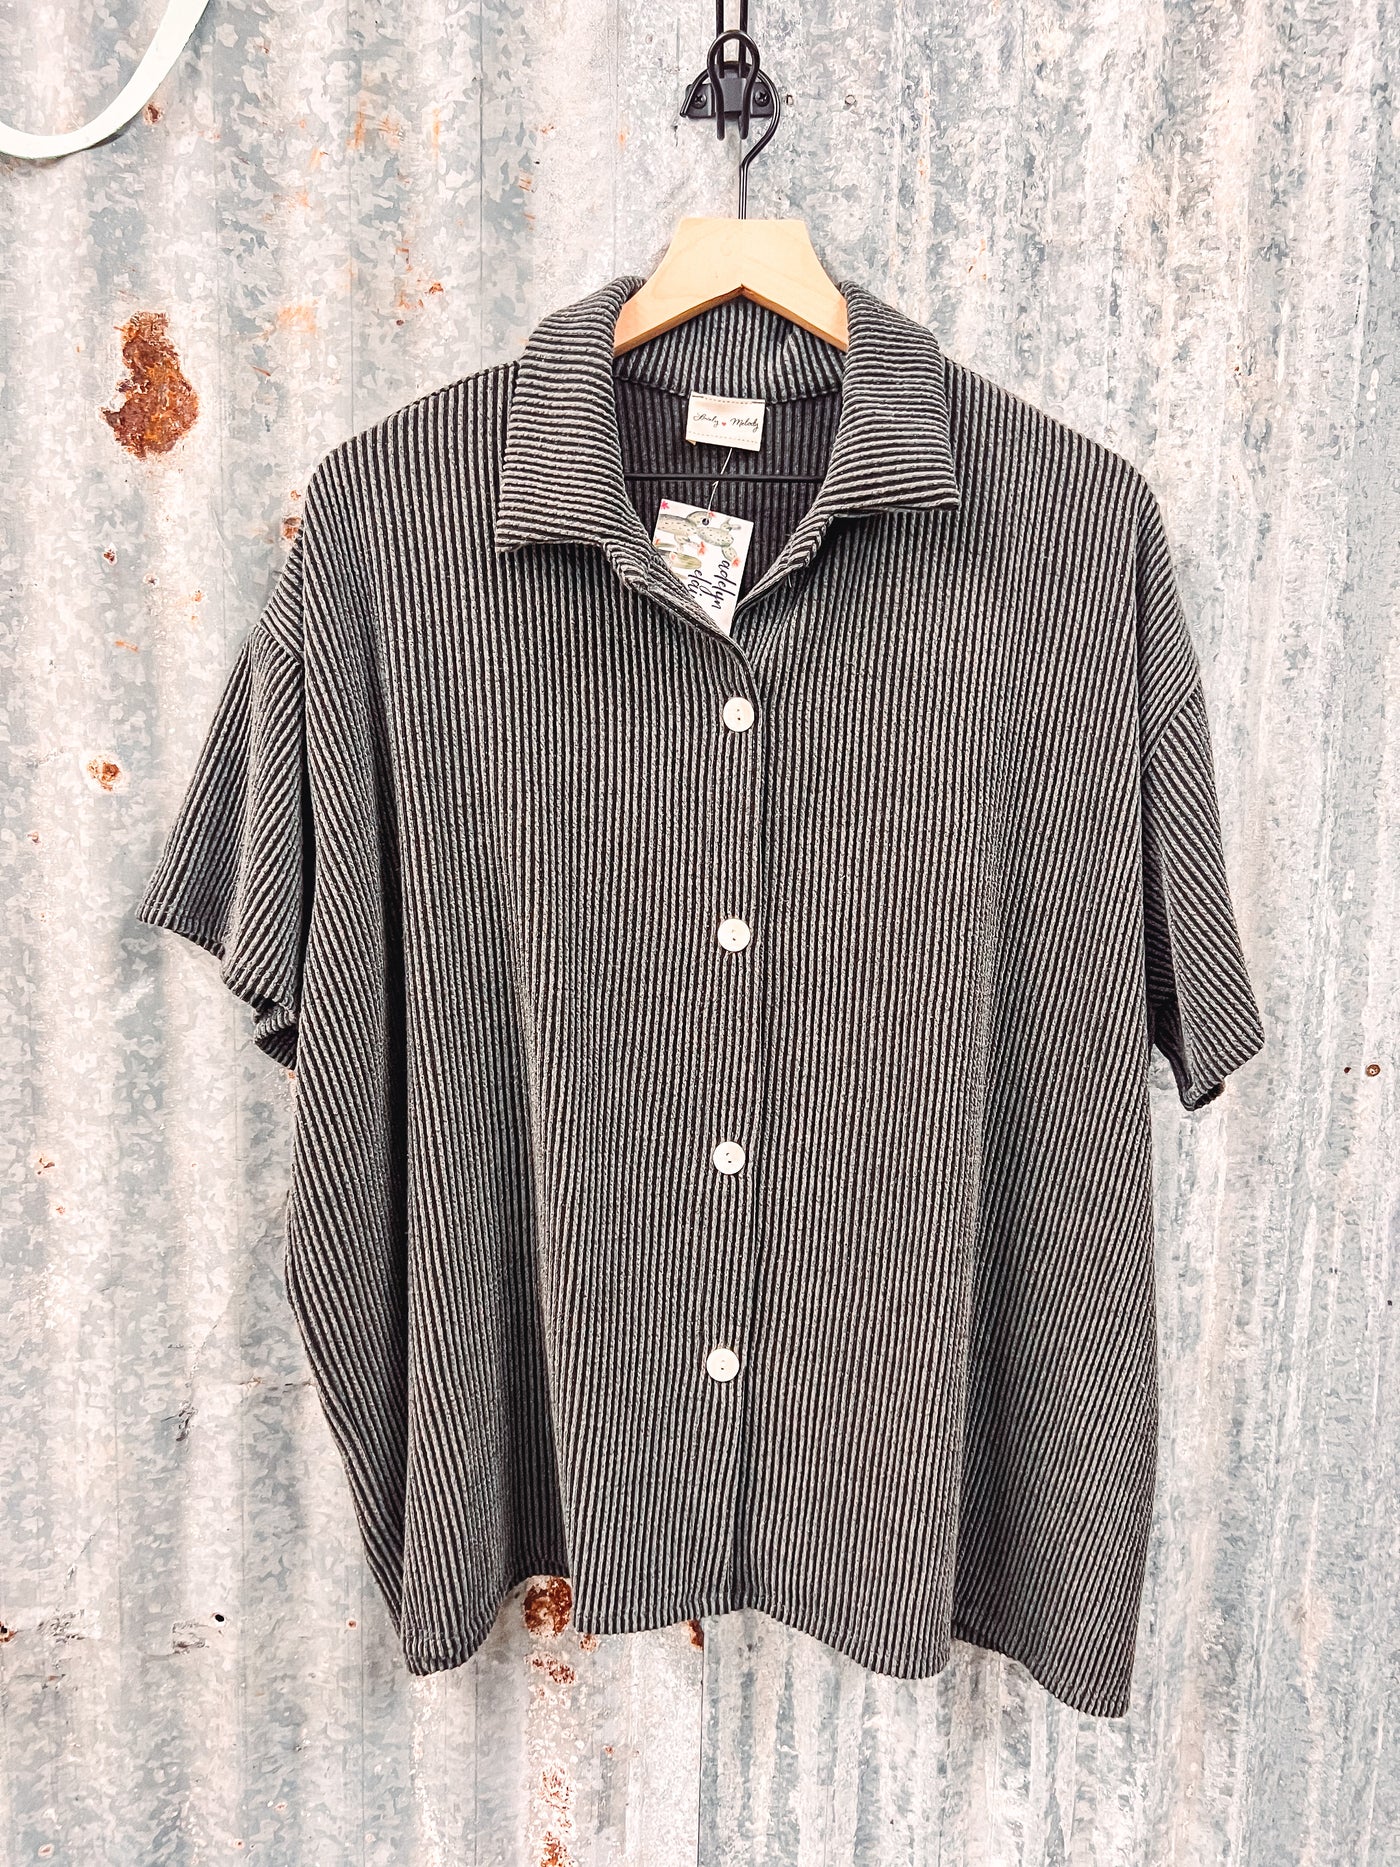 Charcoal Ribbed Shirt - 3XL left-105 SHIRTS & BLOUSES-Lovely Melody-Adelyn Elaine's Boutique, Women's Clothing Boutique in Gilmer, TX